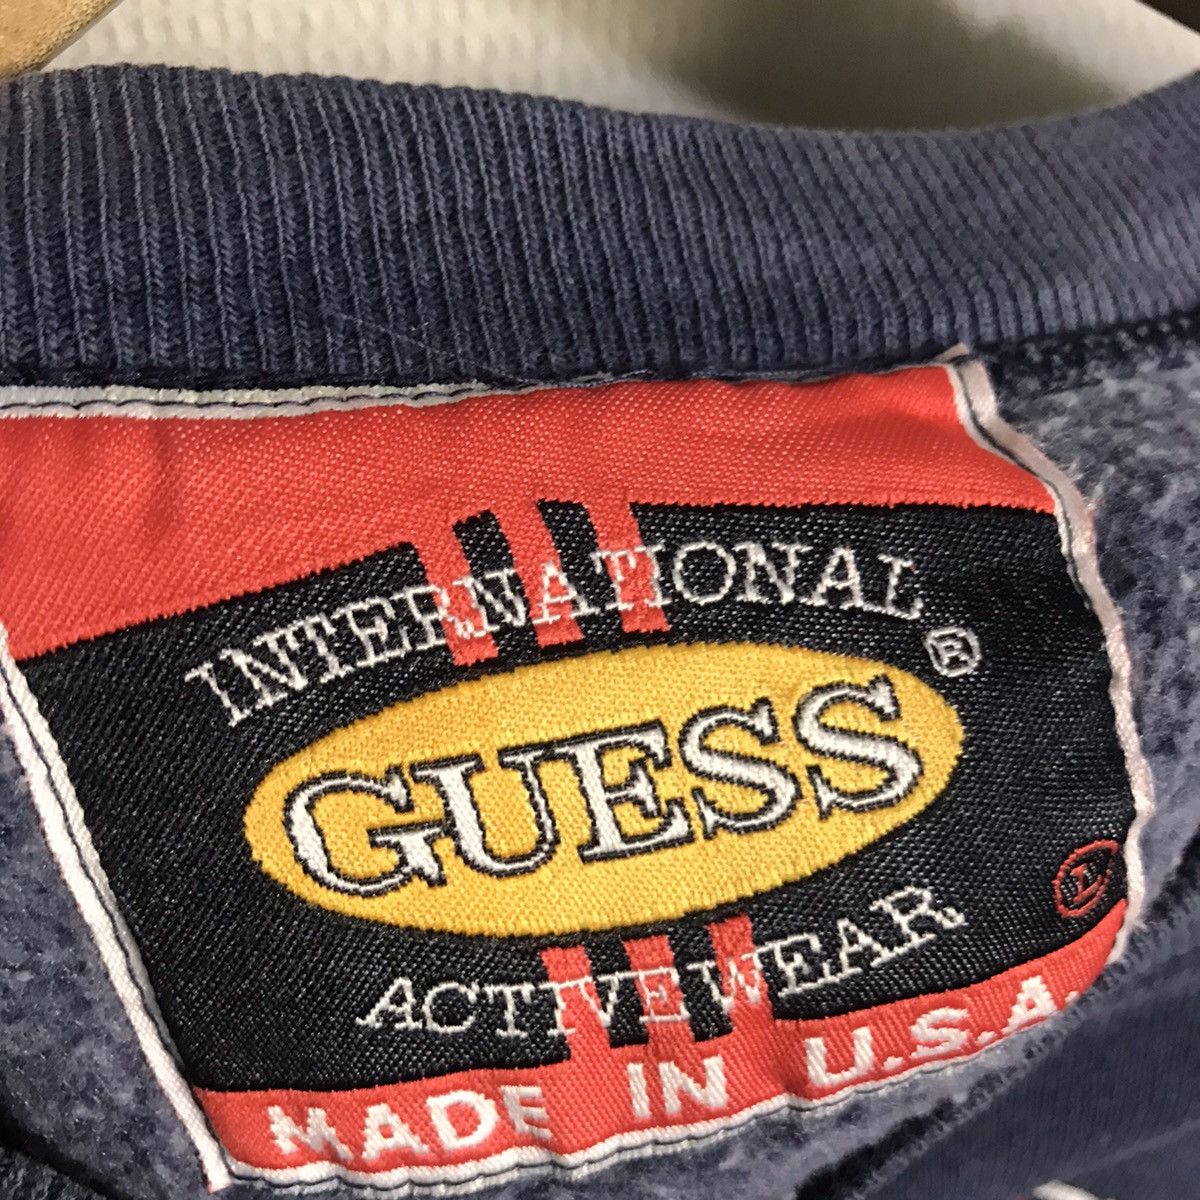 Vintage 1996 guess sweatshirt large size made in usa - 3